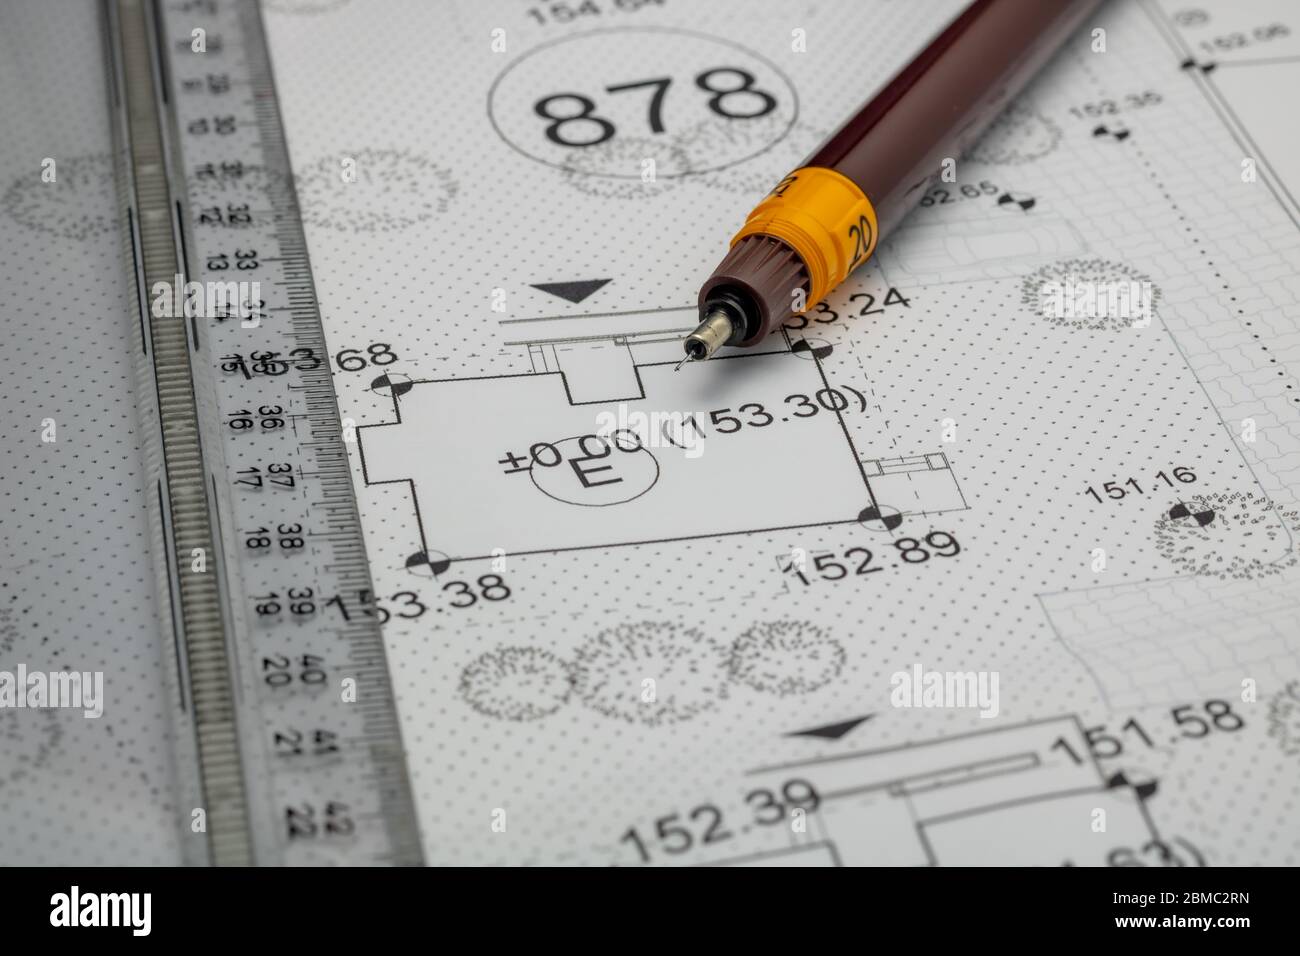 Ruler and pen on the architectural plan Stock Photo